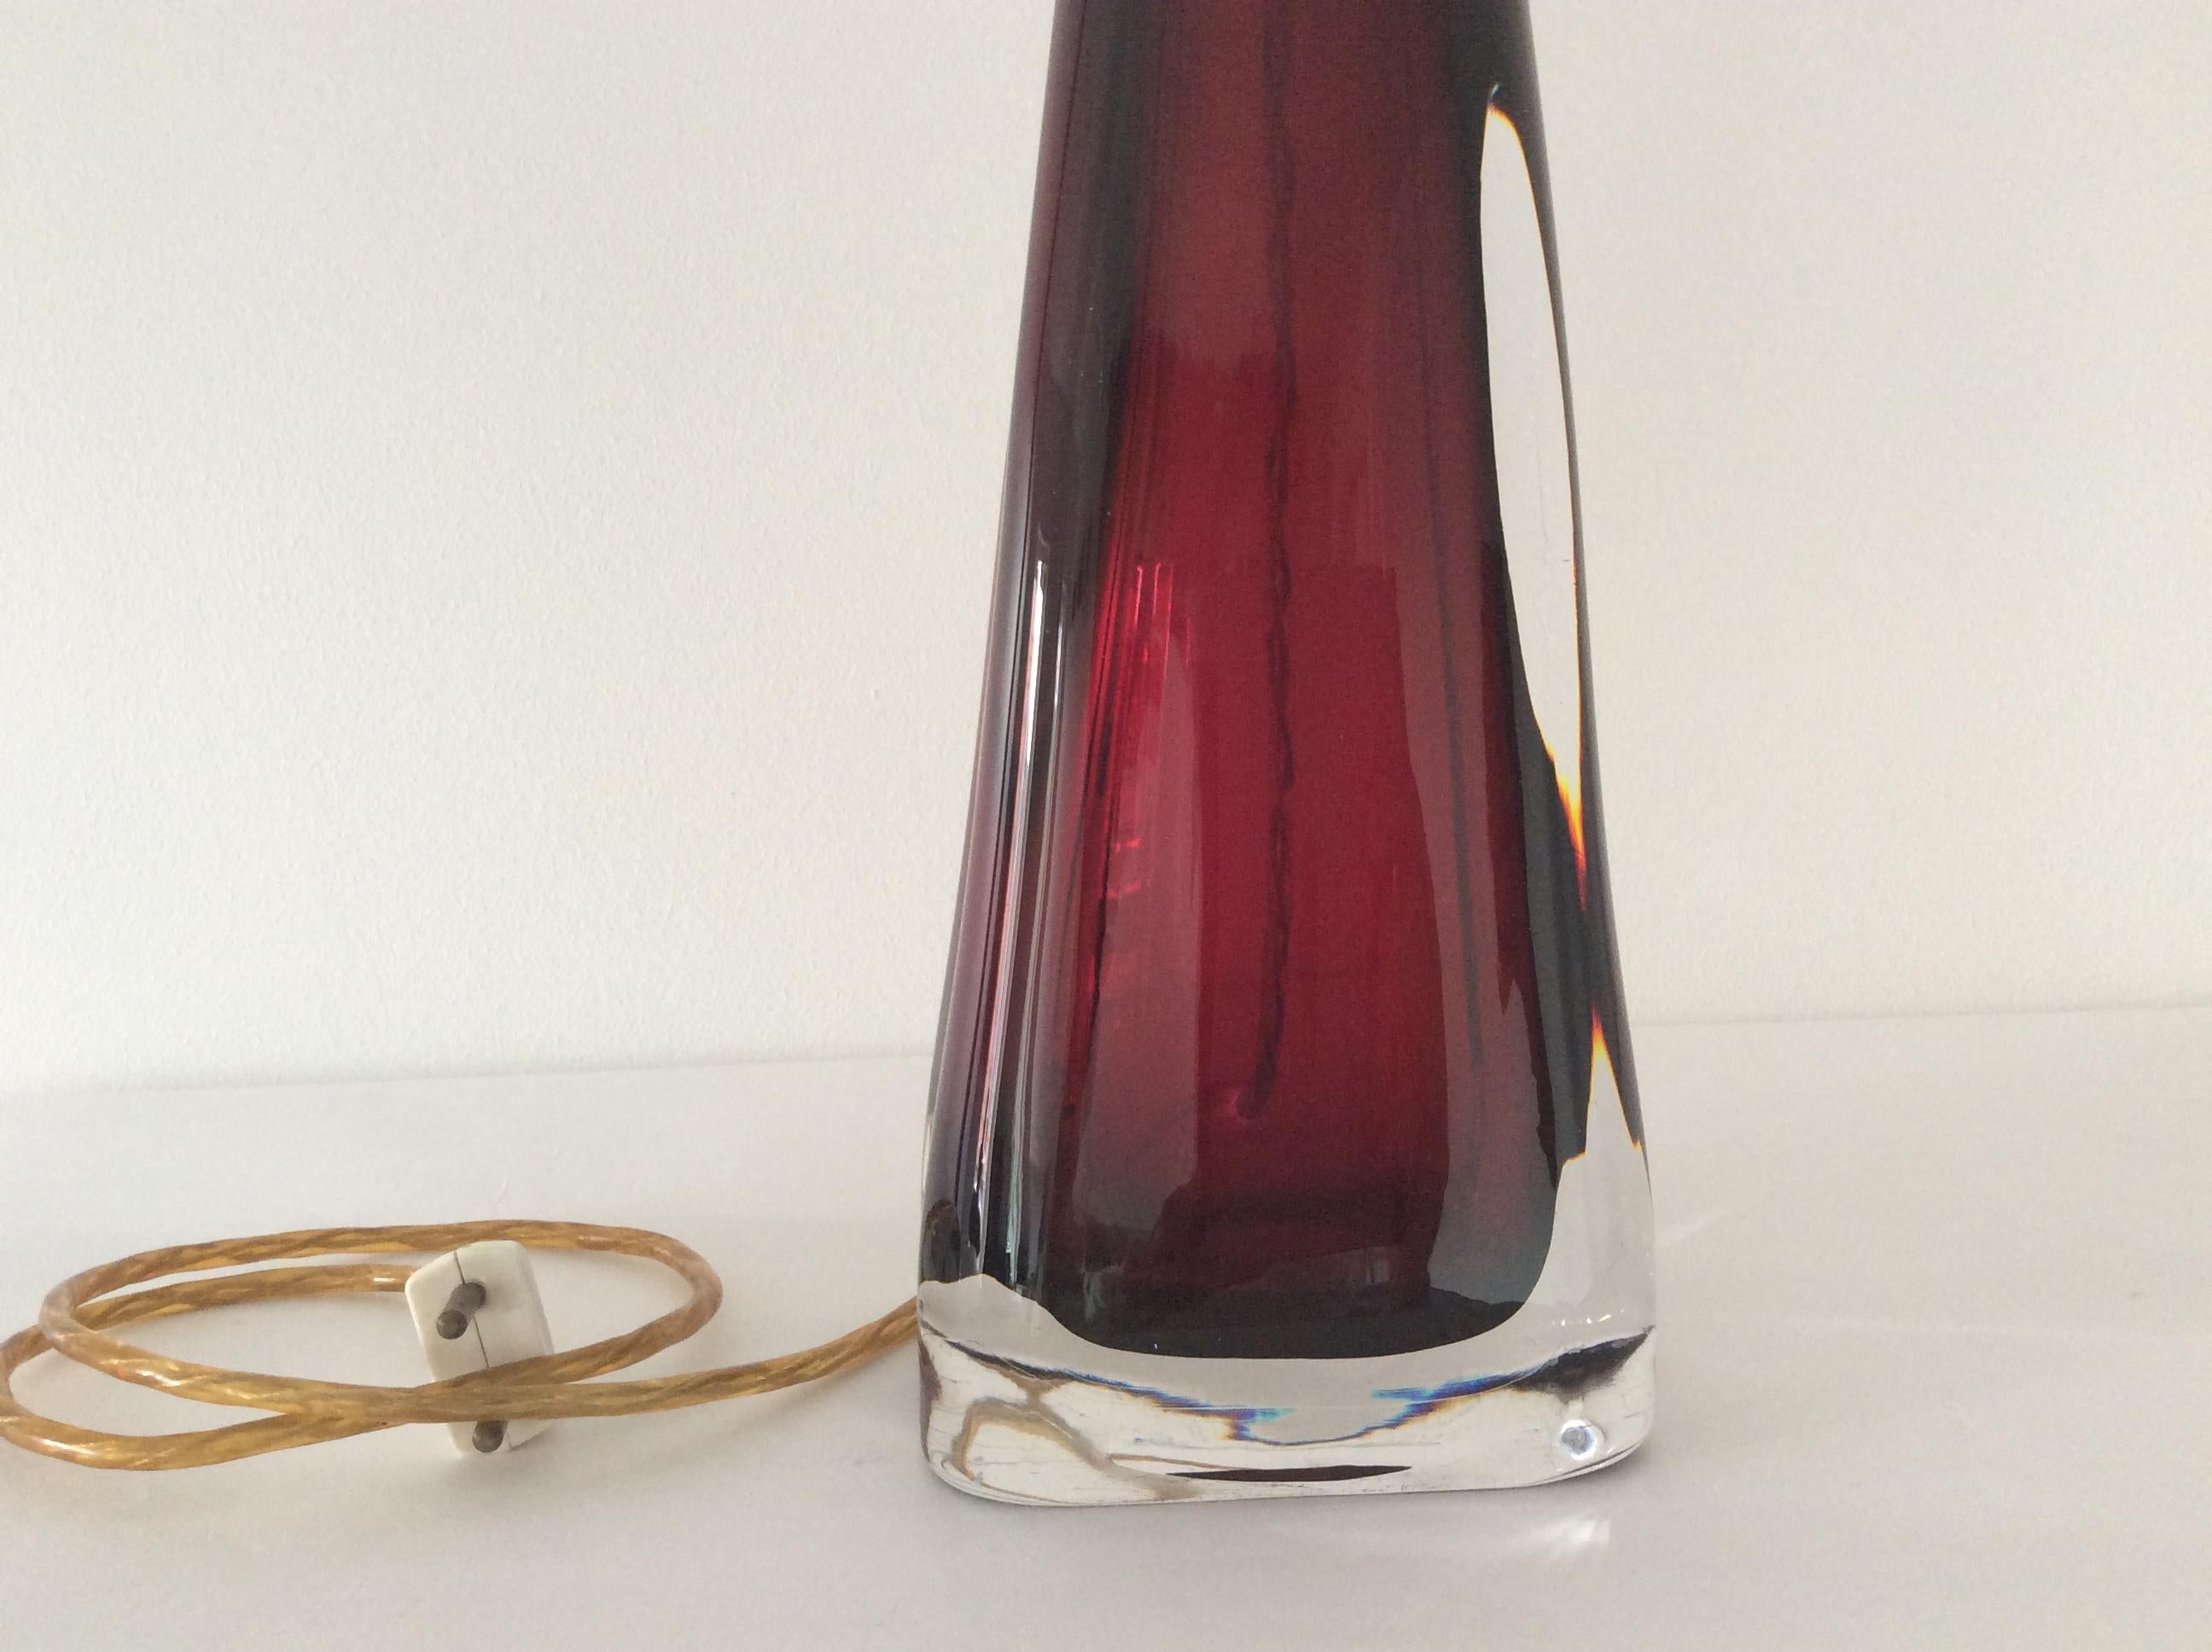 Table lamp, ruby-red with clear glass, designed by Carl Fagerlund.
Produced by Orrefors in Sweden. Signed at the top and bottom. The lamp is offered without shade.
Measurements: Height with socket, circa 50 cm.

  